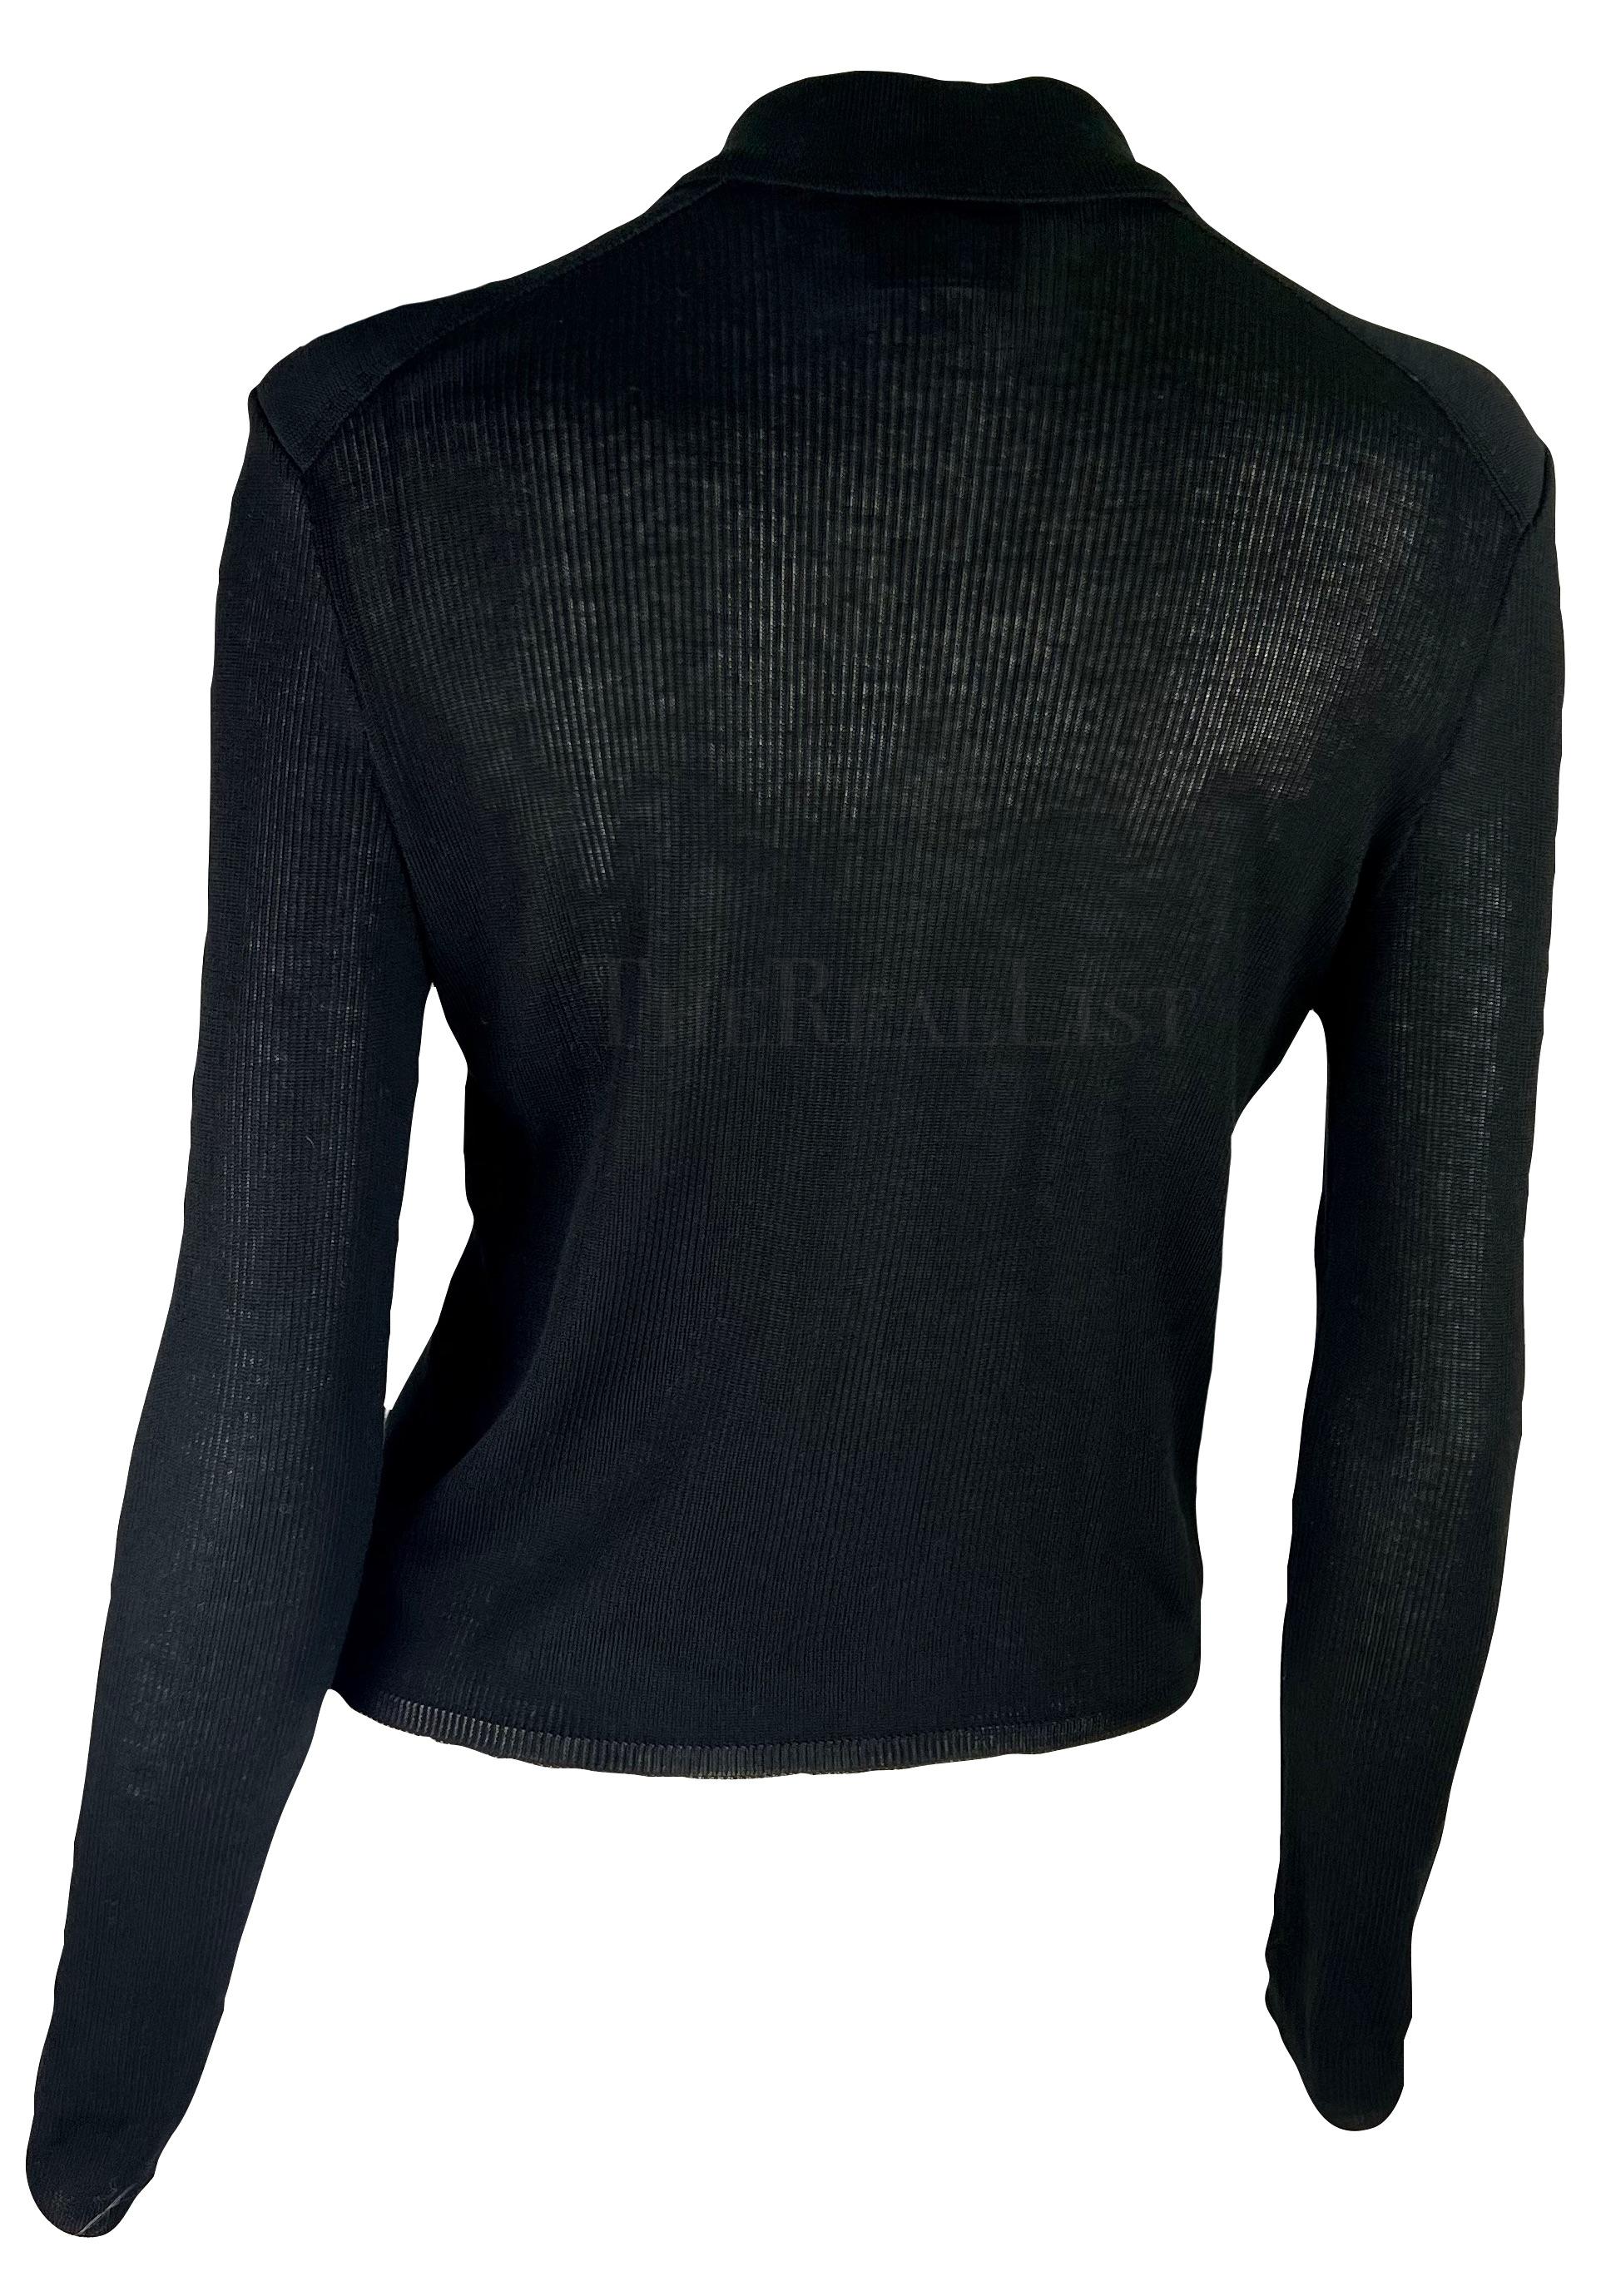 1998 Gucci by Tom Ford Semi-Sheer Ribbed Stretch Sheer Knit Black Button-Up Top For Sale 1